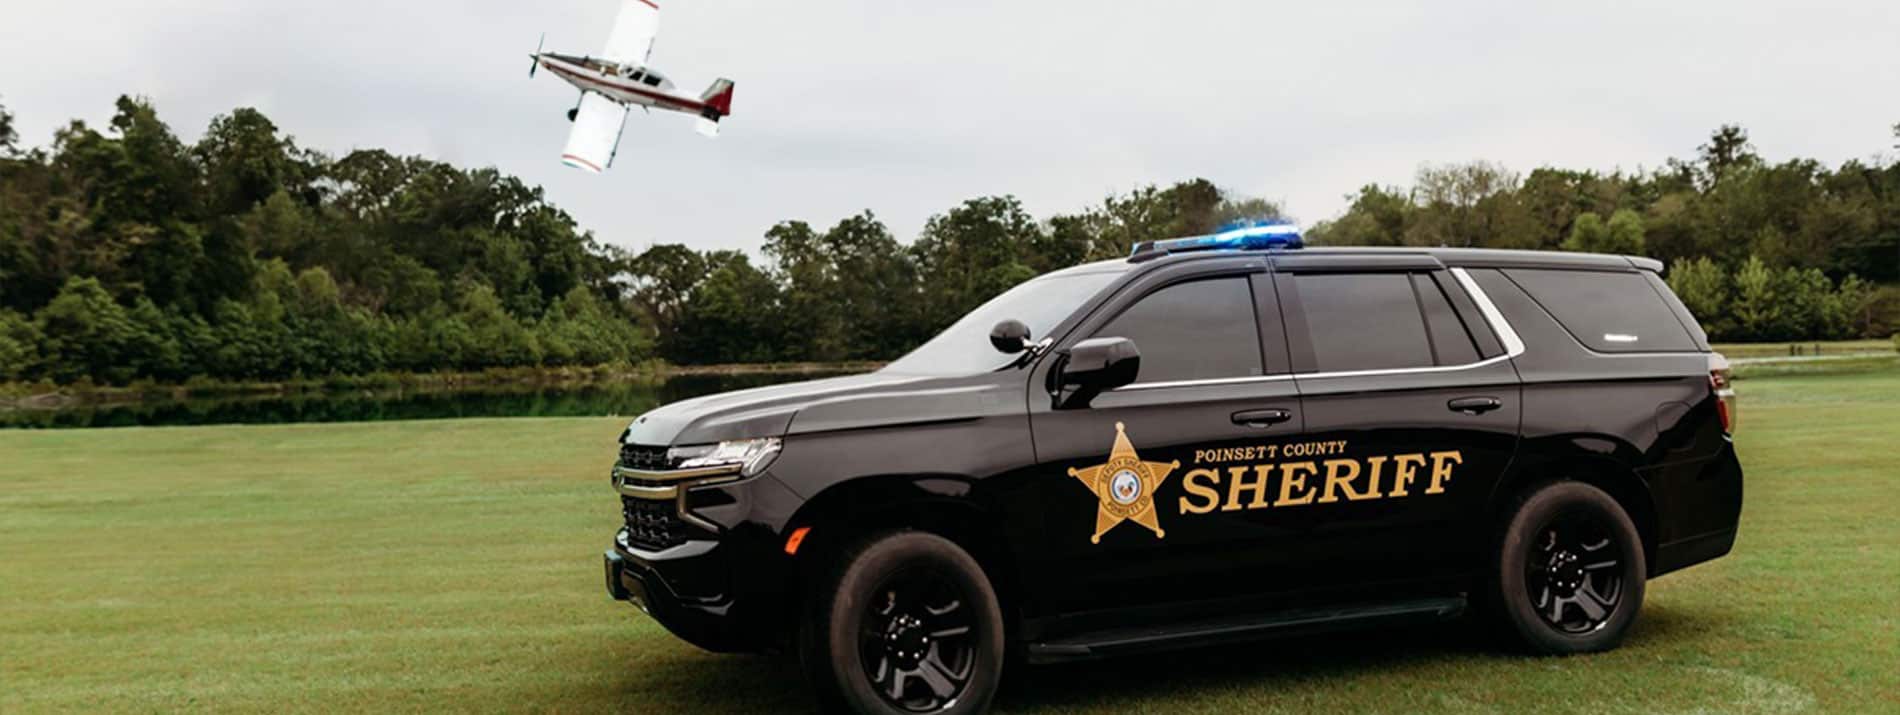 A Poinsett County Sheriff vehicle in a field with an airplane flying behind it.